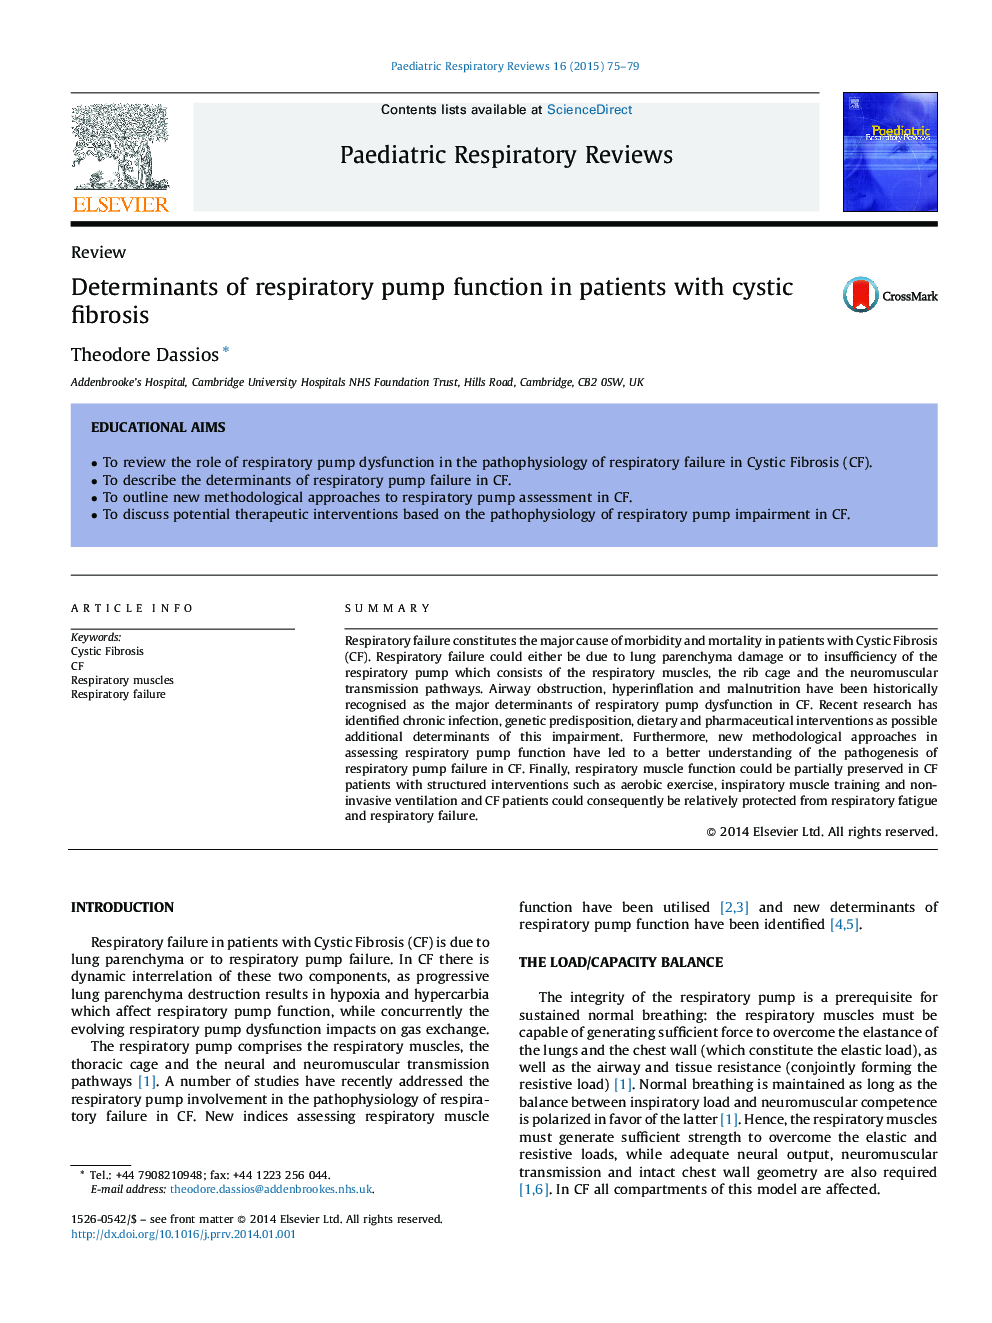 Determinants of respiratory pump function in patients with cystic fibrosis